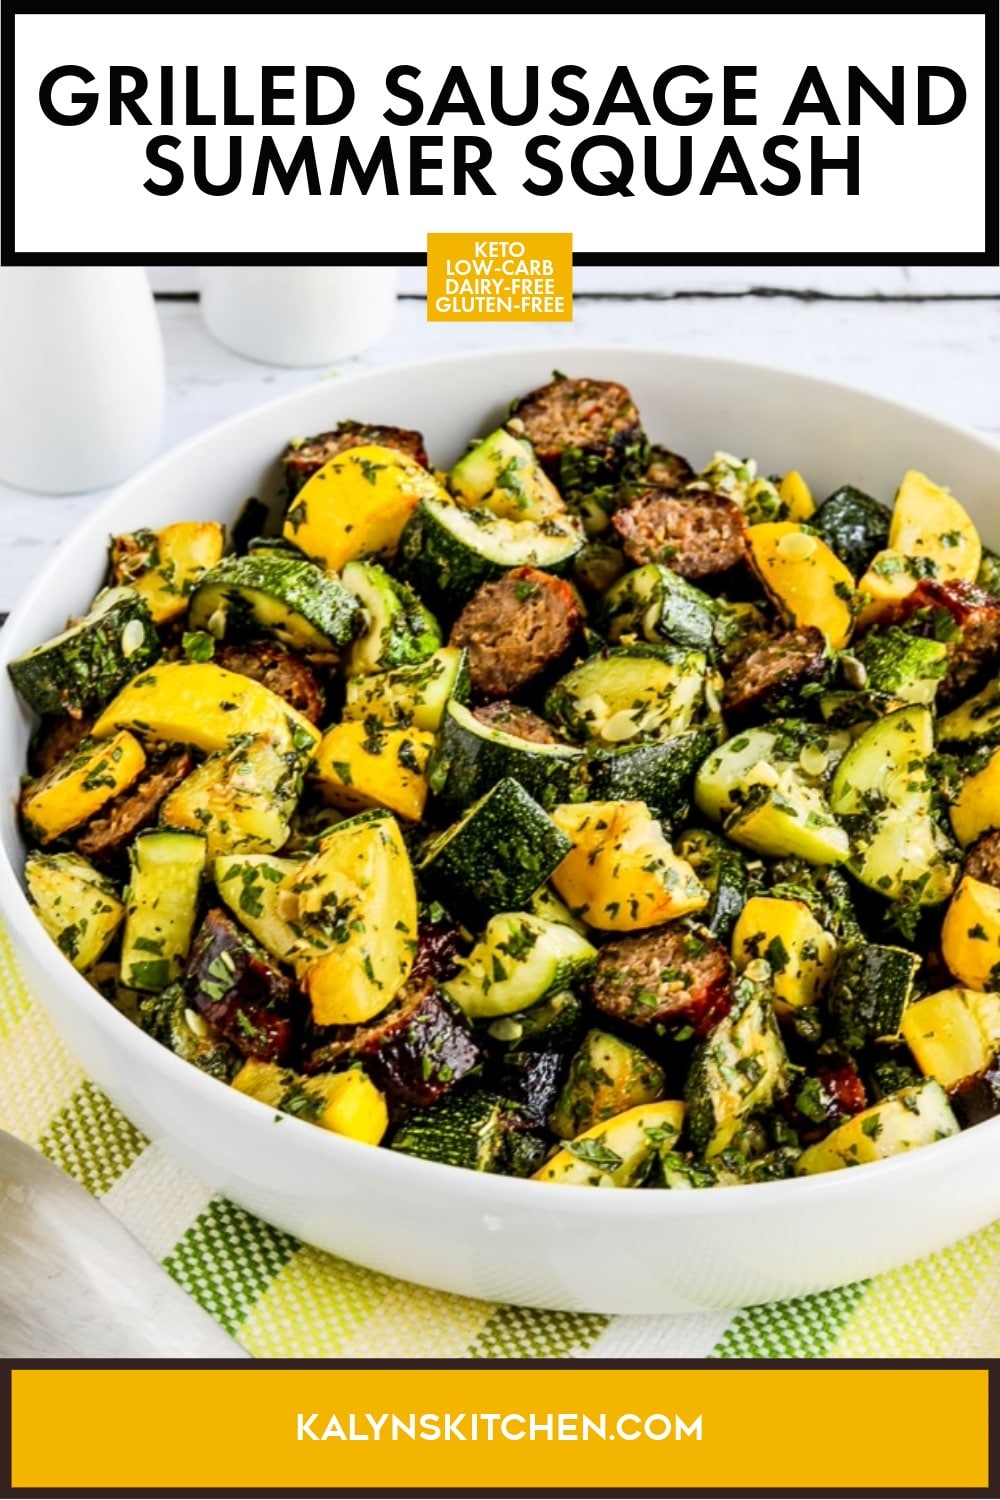 Pinterest image of Grilled Sausage and Summer Squash